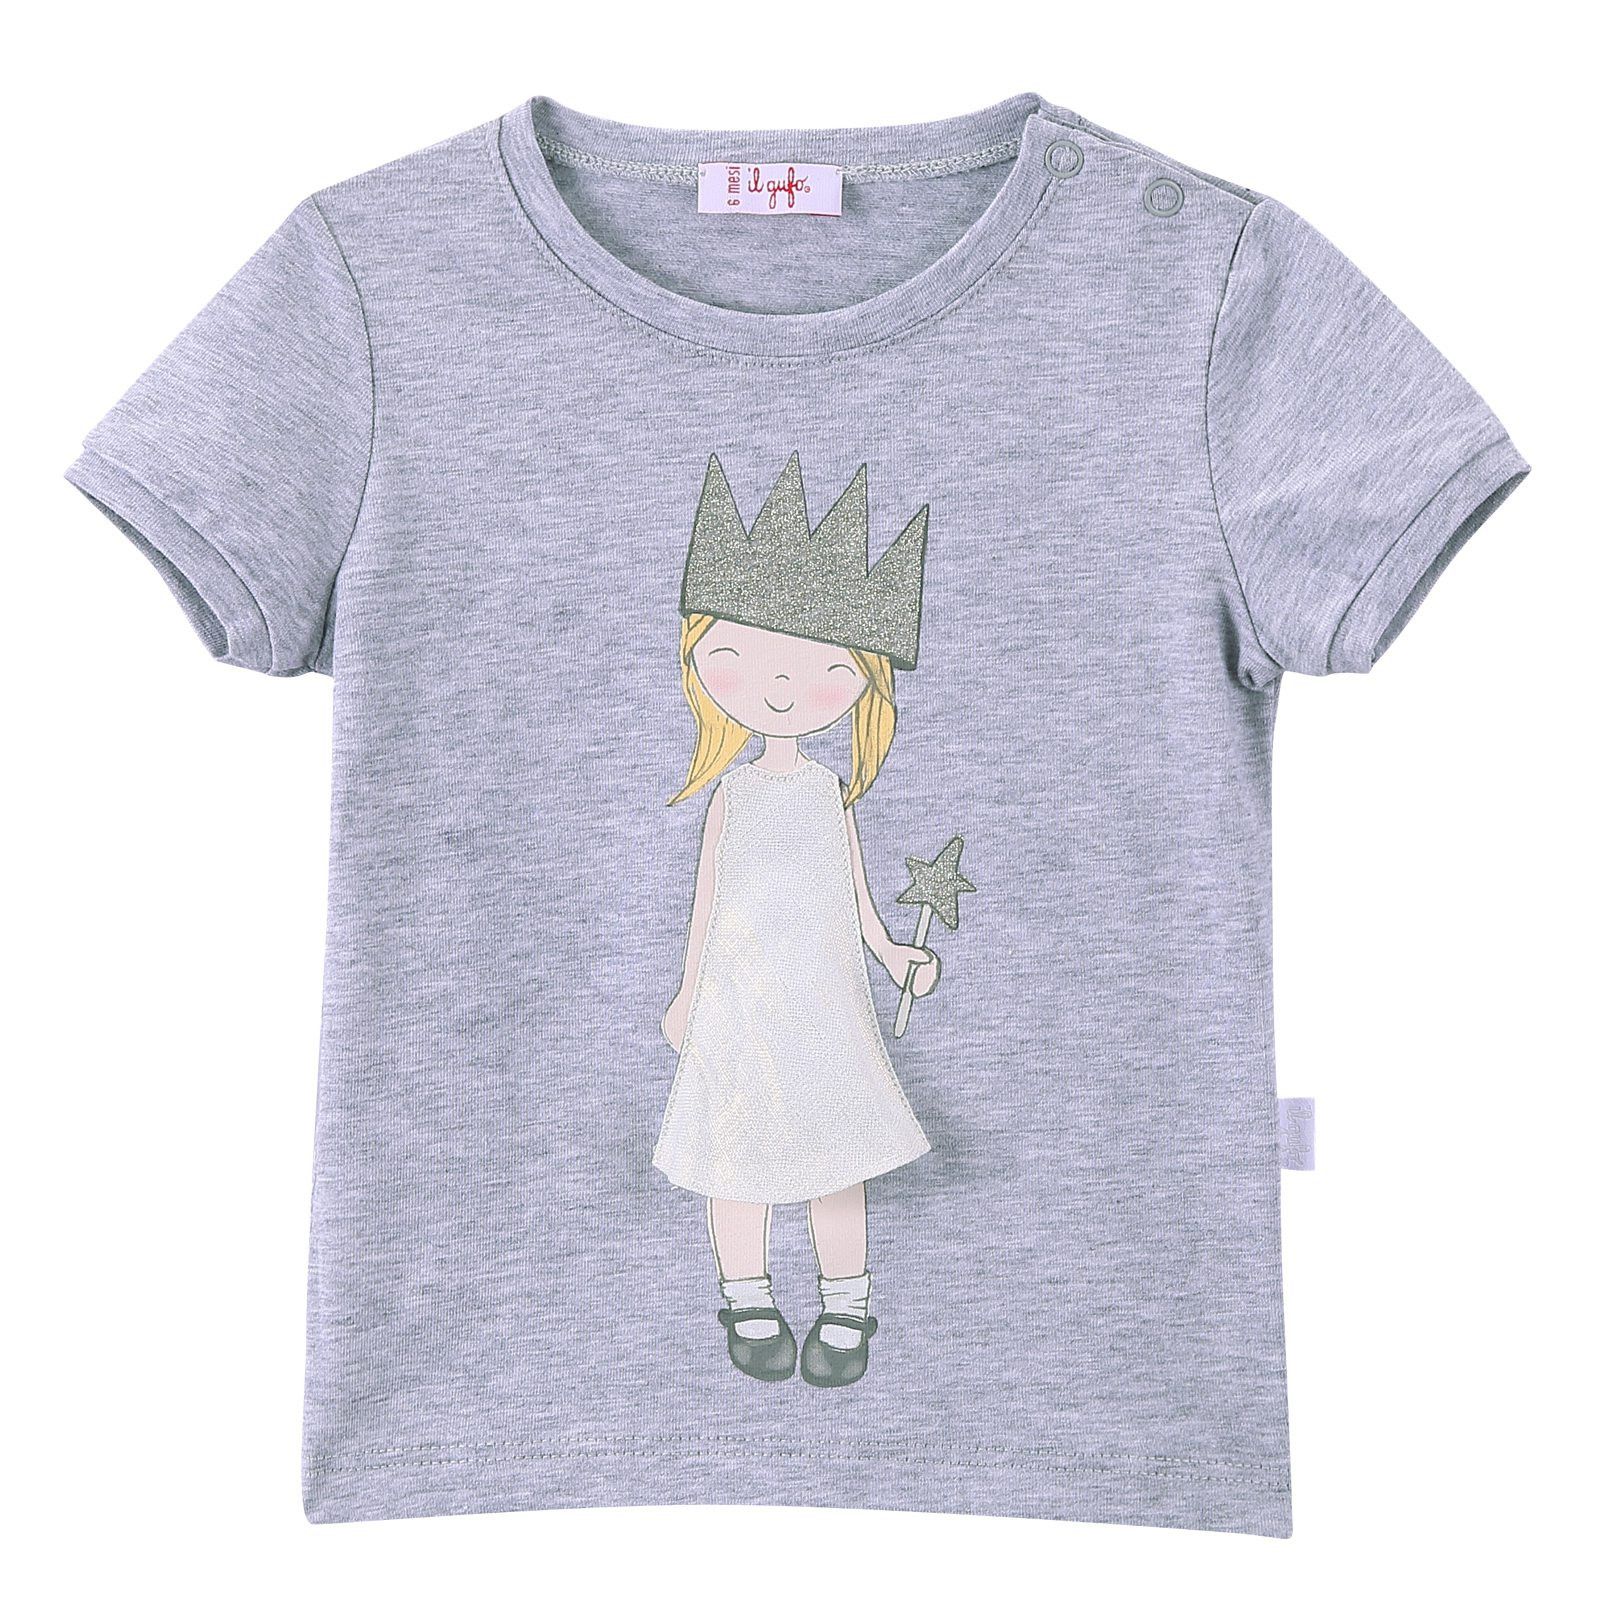 Girls Grey Fairy Printed T-Shirt With Ribbed Cuffs - CÉMAROSE | Children's Fashion Store - 1